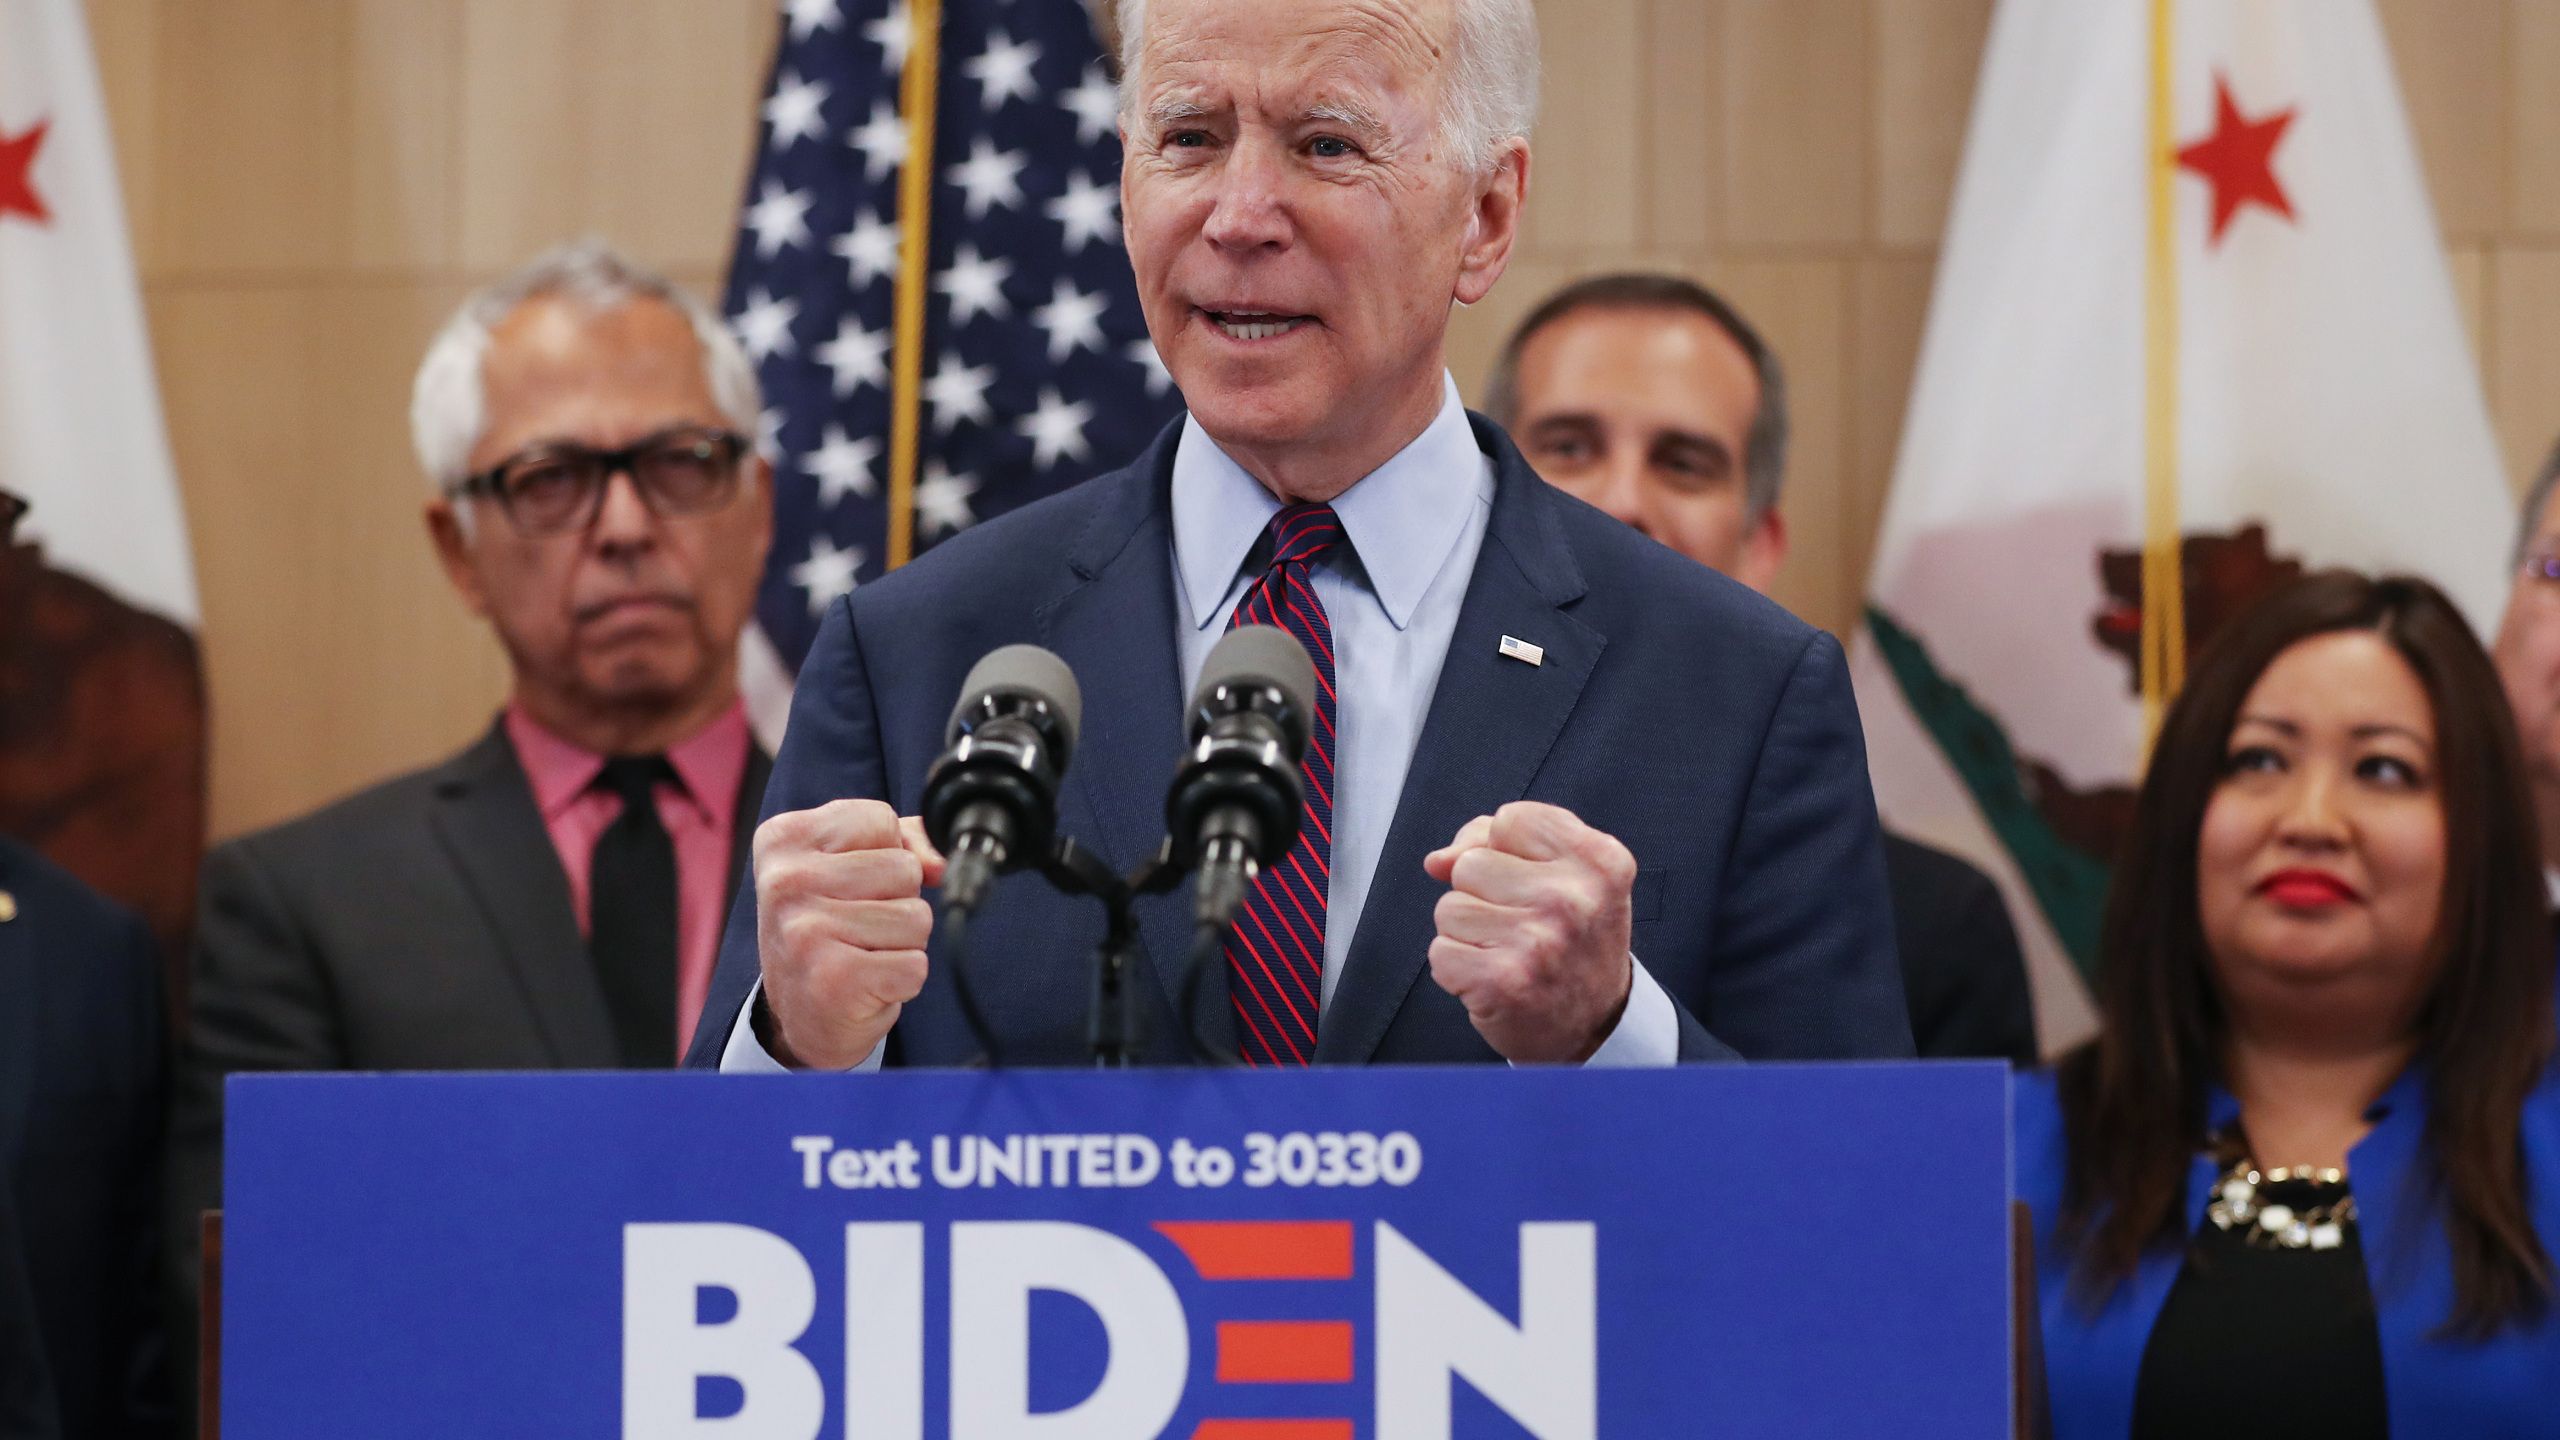 Super Tuesday wins turned Biden into a confident candidate